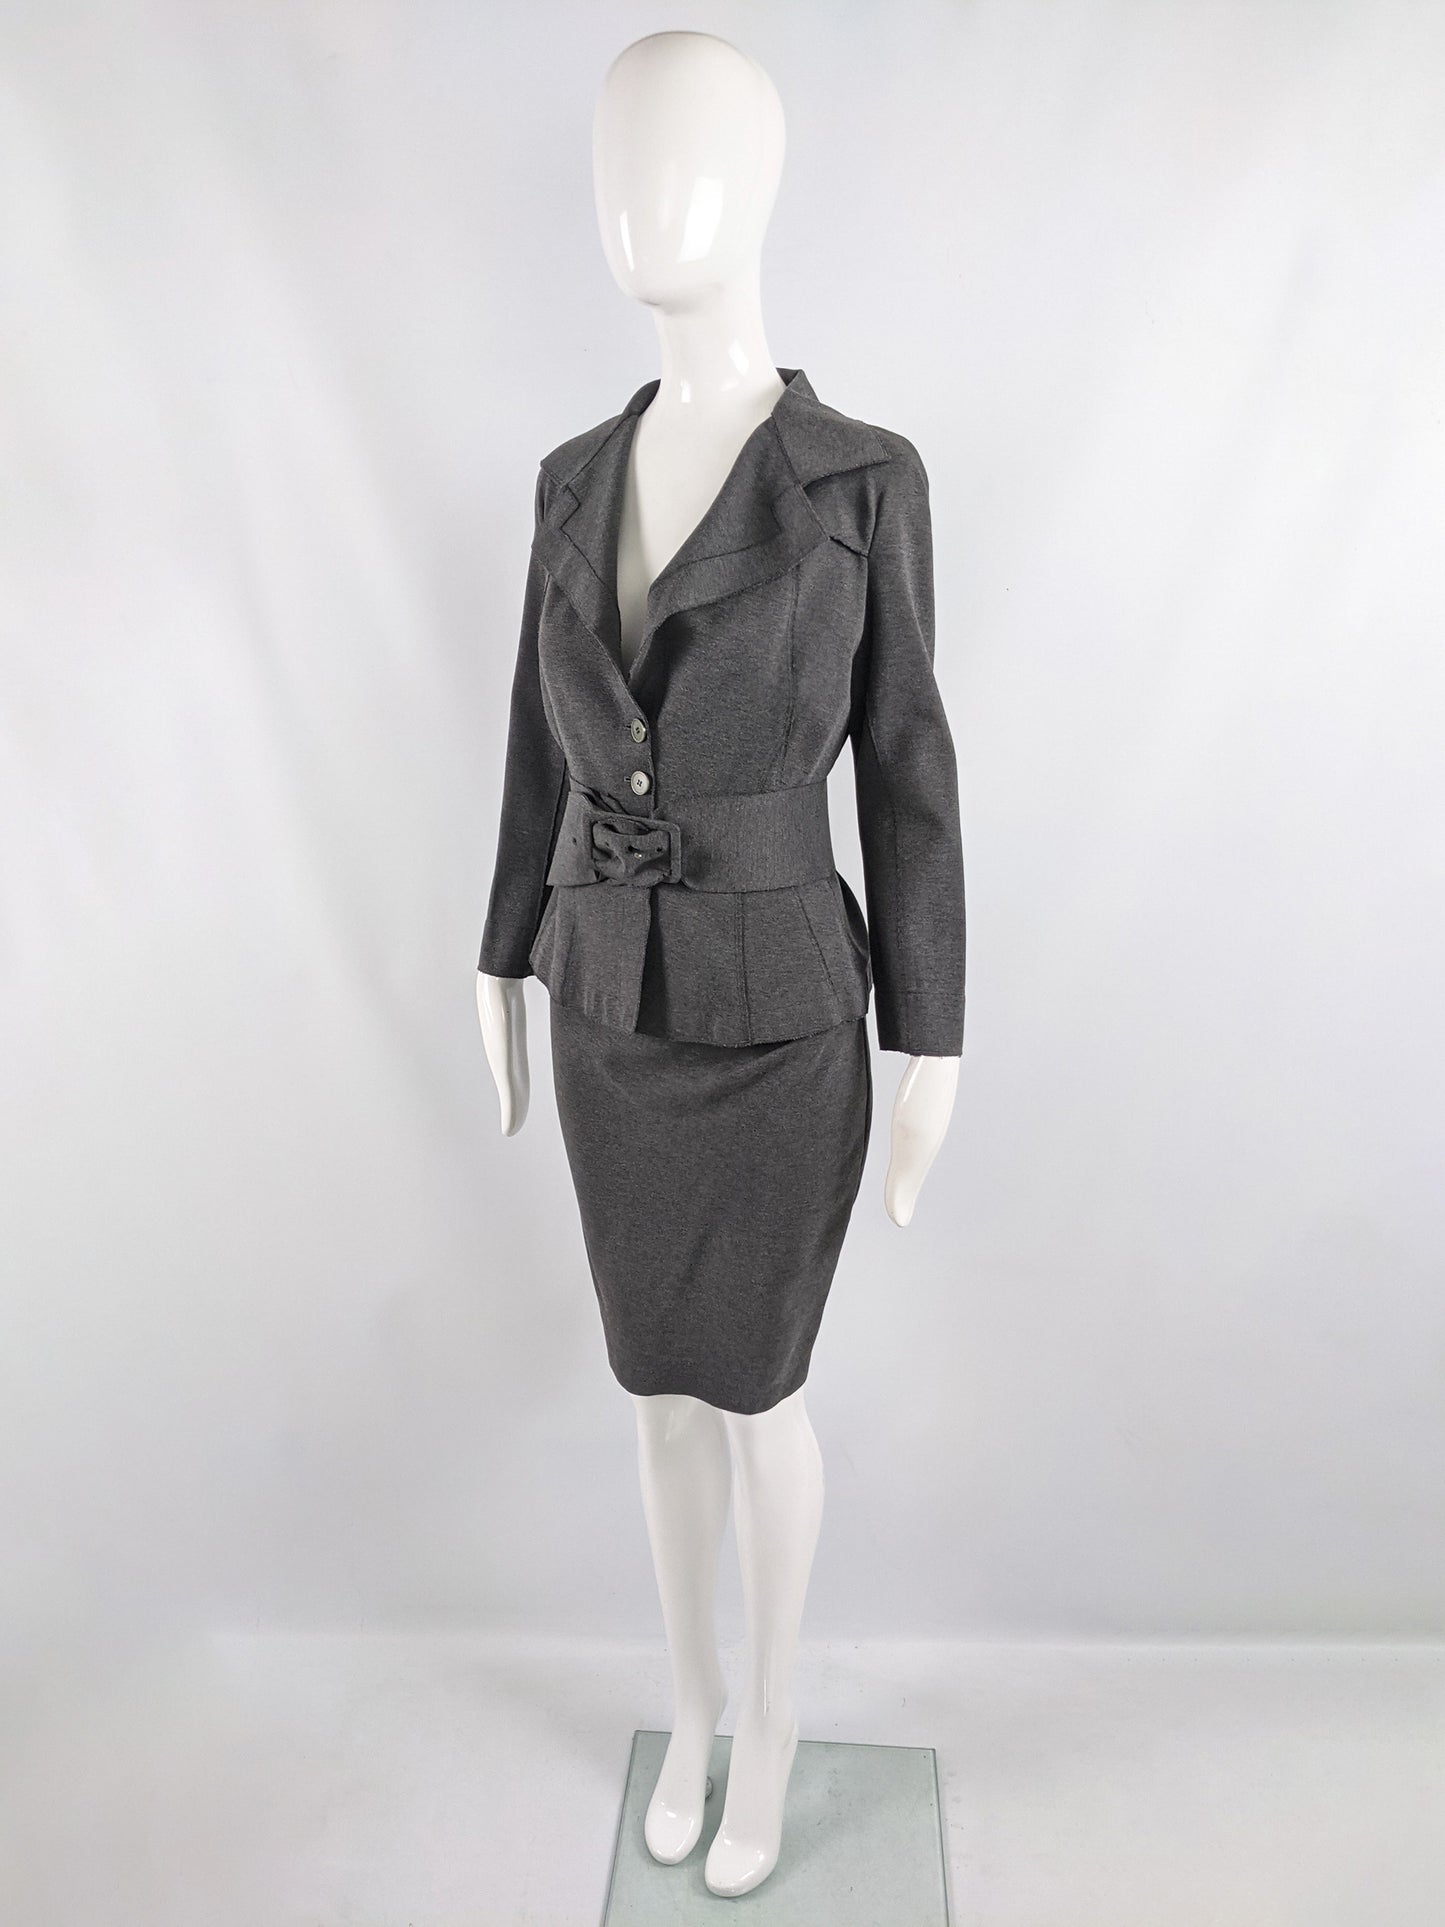 An image of a grey vintage Donna Karan suit for women, consisting of a pencil skirt, blazer and belt.